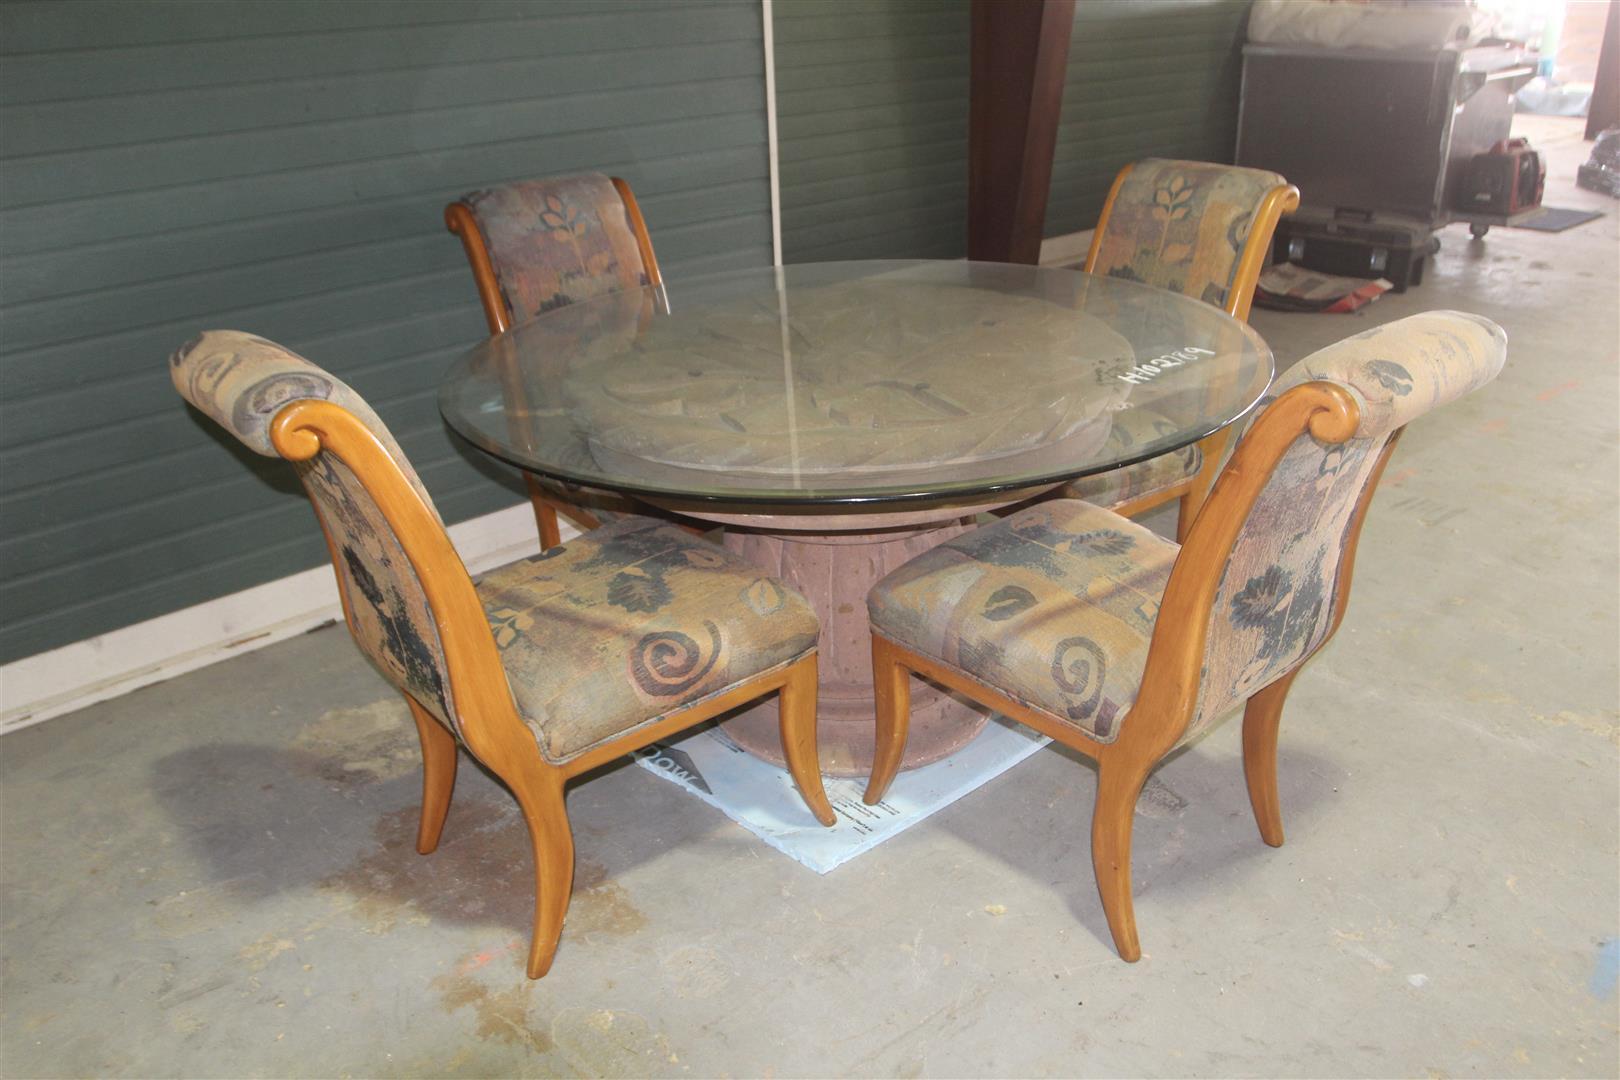 HVY DUTY GLASS TABLE W/4 CHAIRS